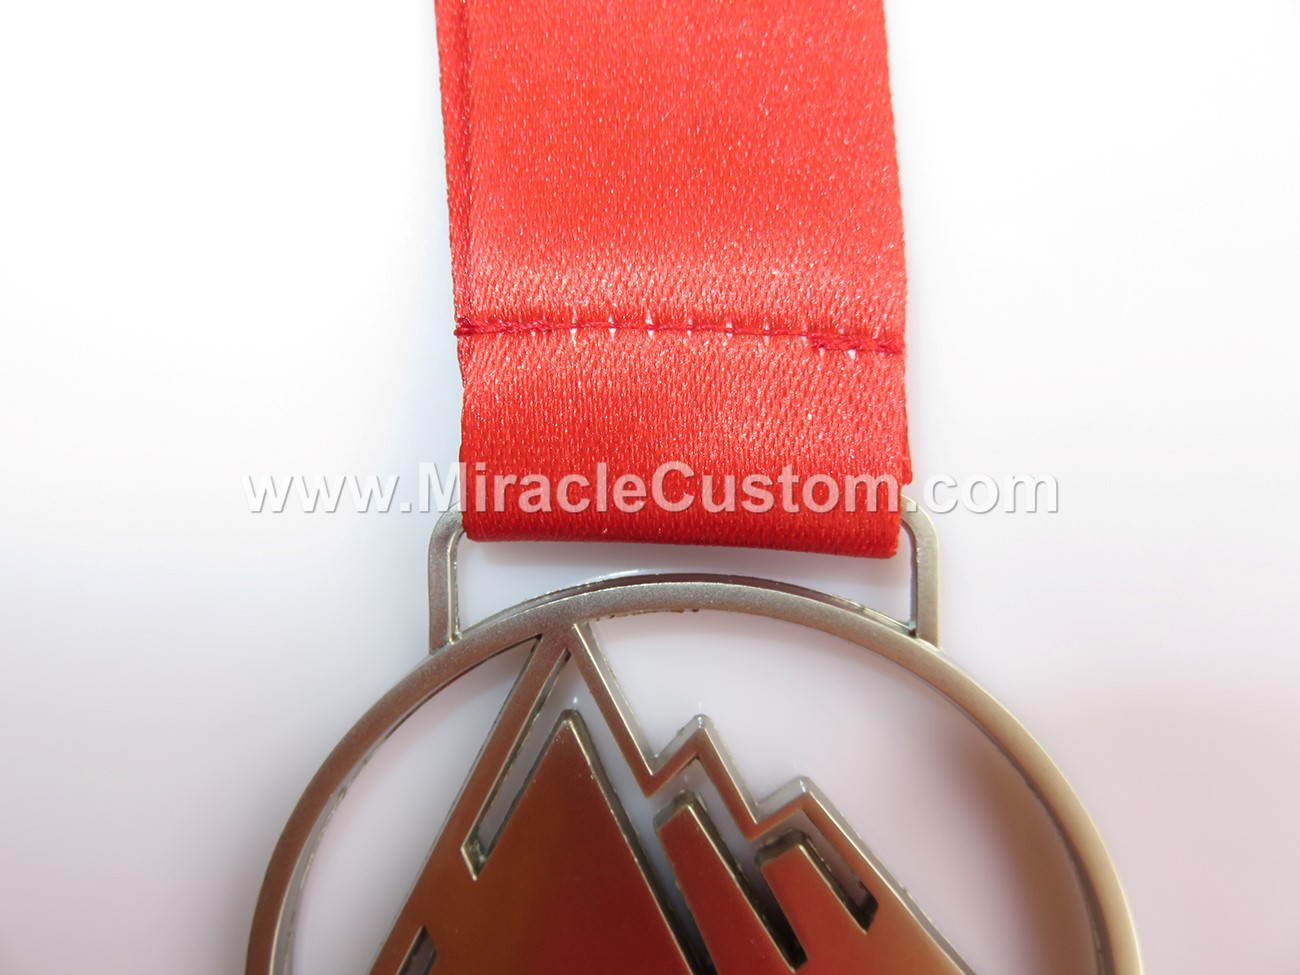 bespoke cut out race medals